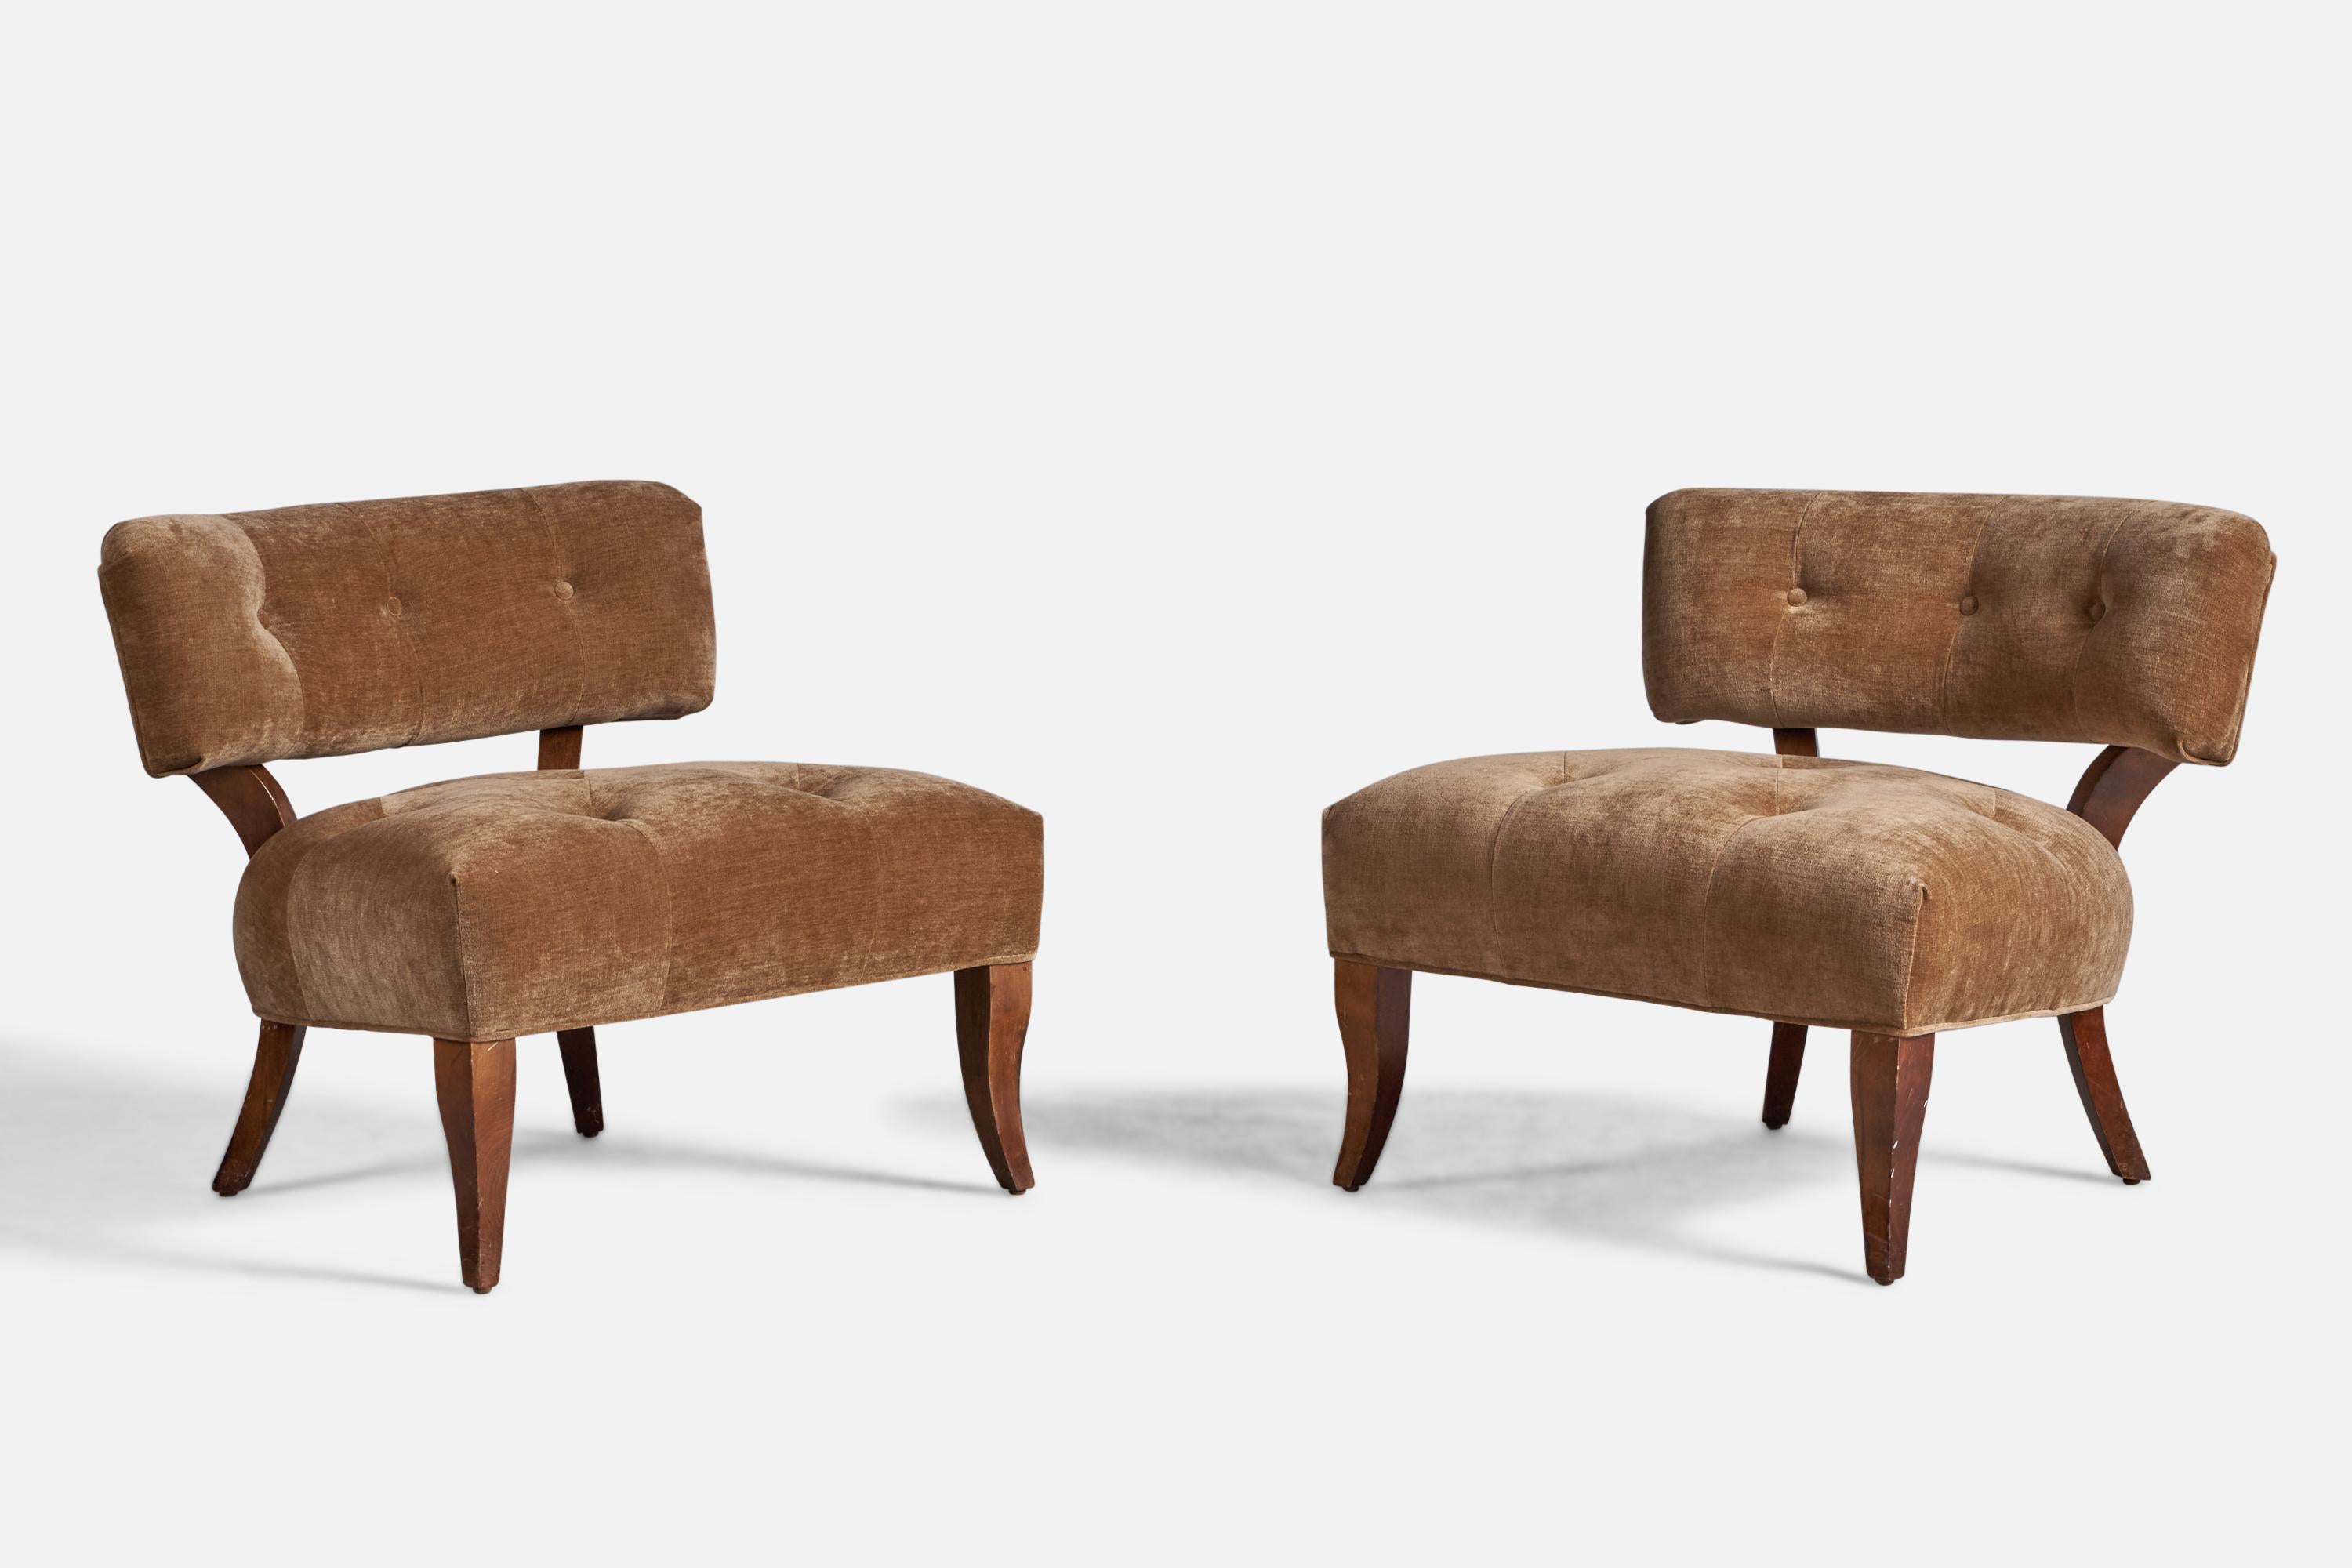 A pair of beige fabric and wood slipper chairs attributed to Billy Haines, USA, c. 1940s.

17